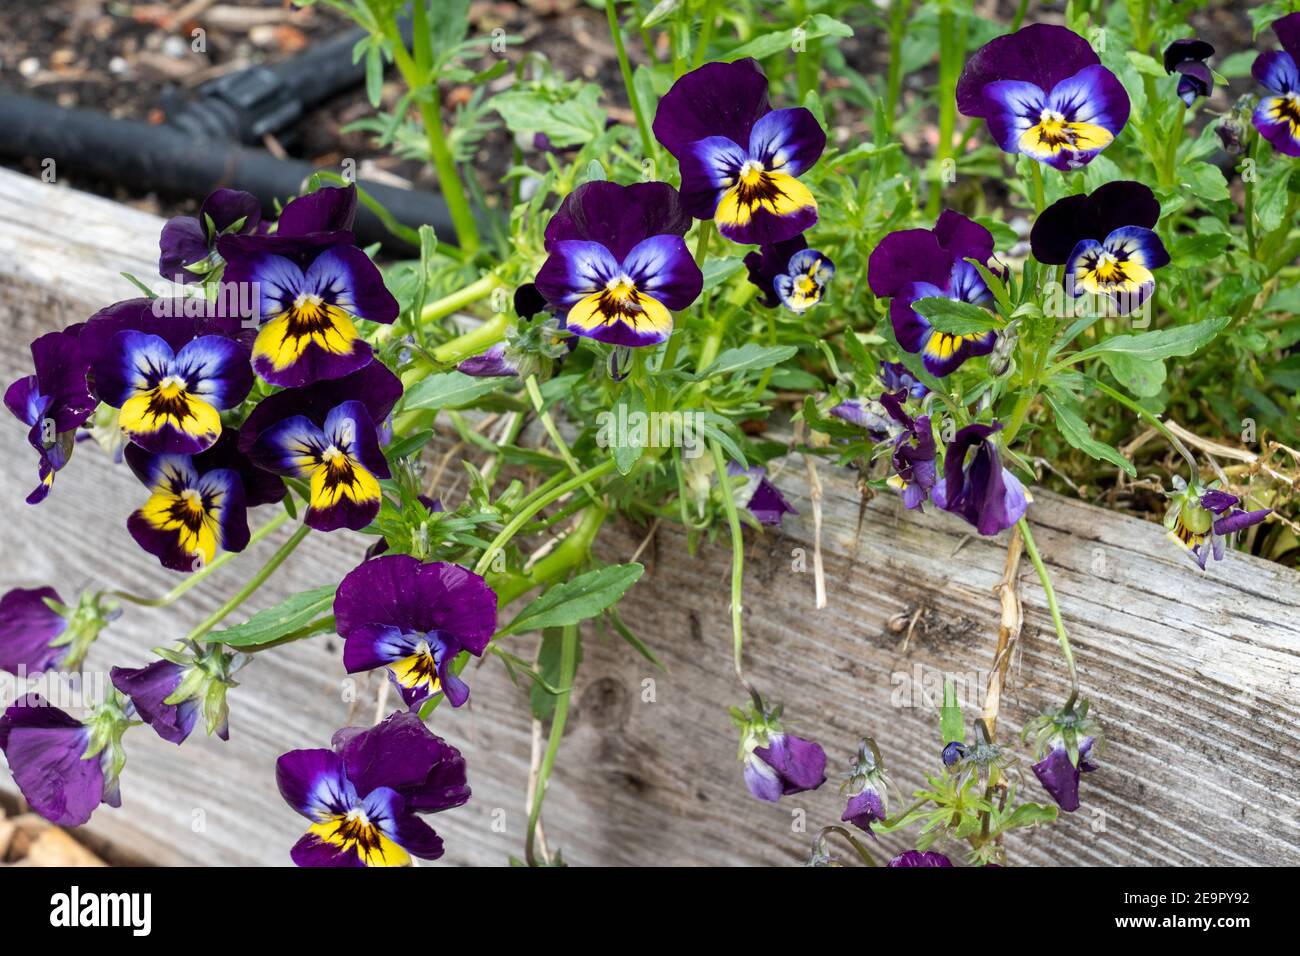 Issaquah, Washington, USA.  Pansies growing in a raised bed garden. Stock Photo